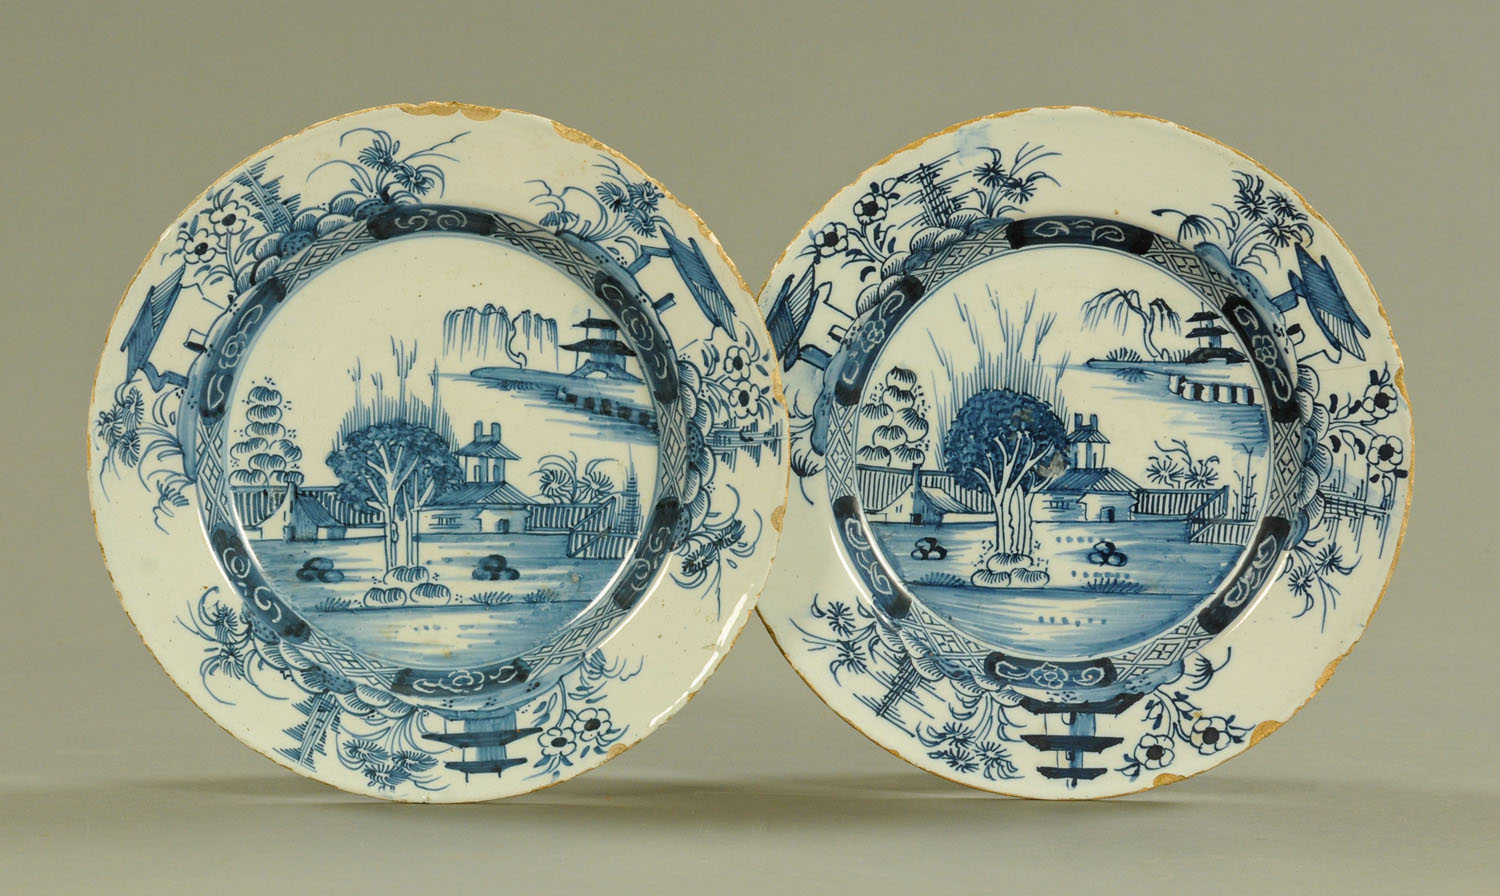 A pair of 18th century Delft chinoiserie patterned plates. Diameter 23 cm (see illustration).